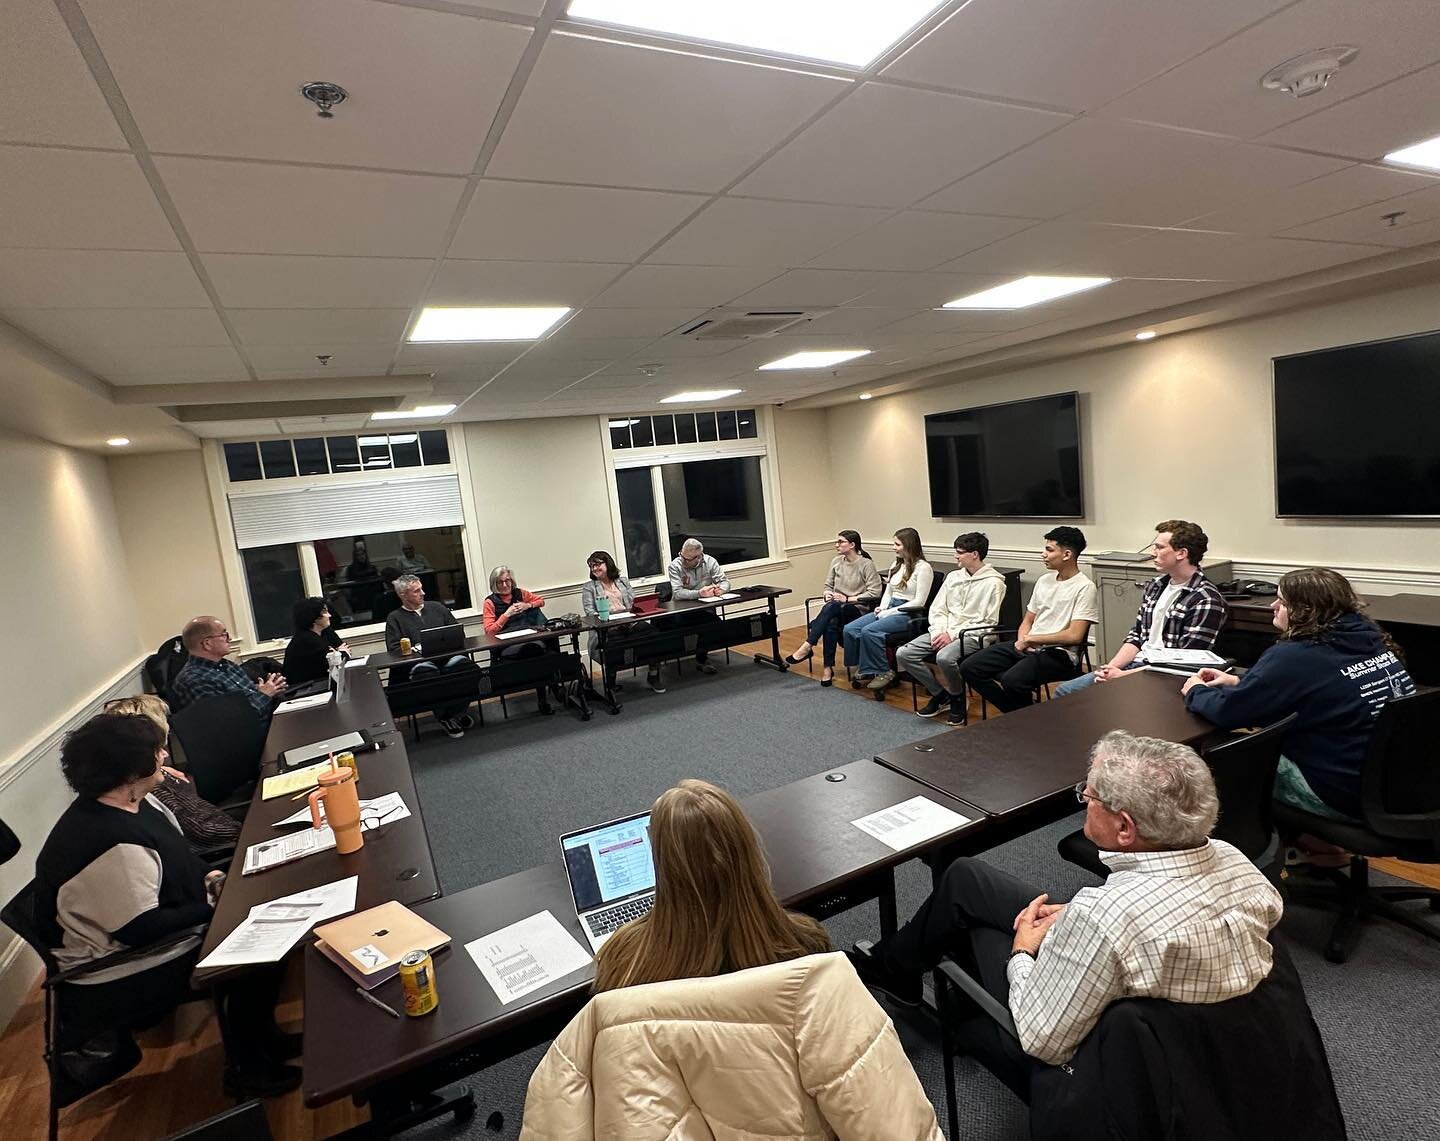 Last night the GEF Board of Directors met with our new Student Advisors for the first time to talk schools, opportunities, and desert islands. Always a treat to bring students and their perspectives to the table!